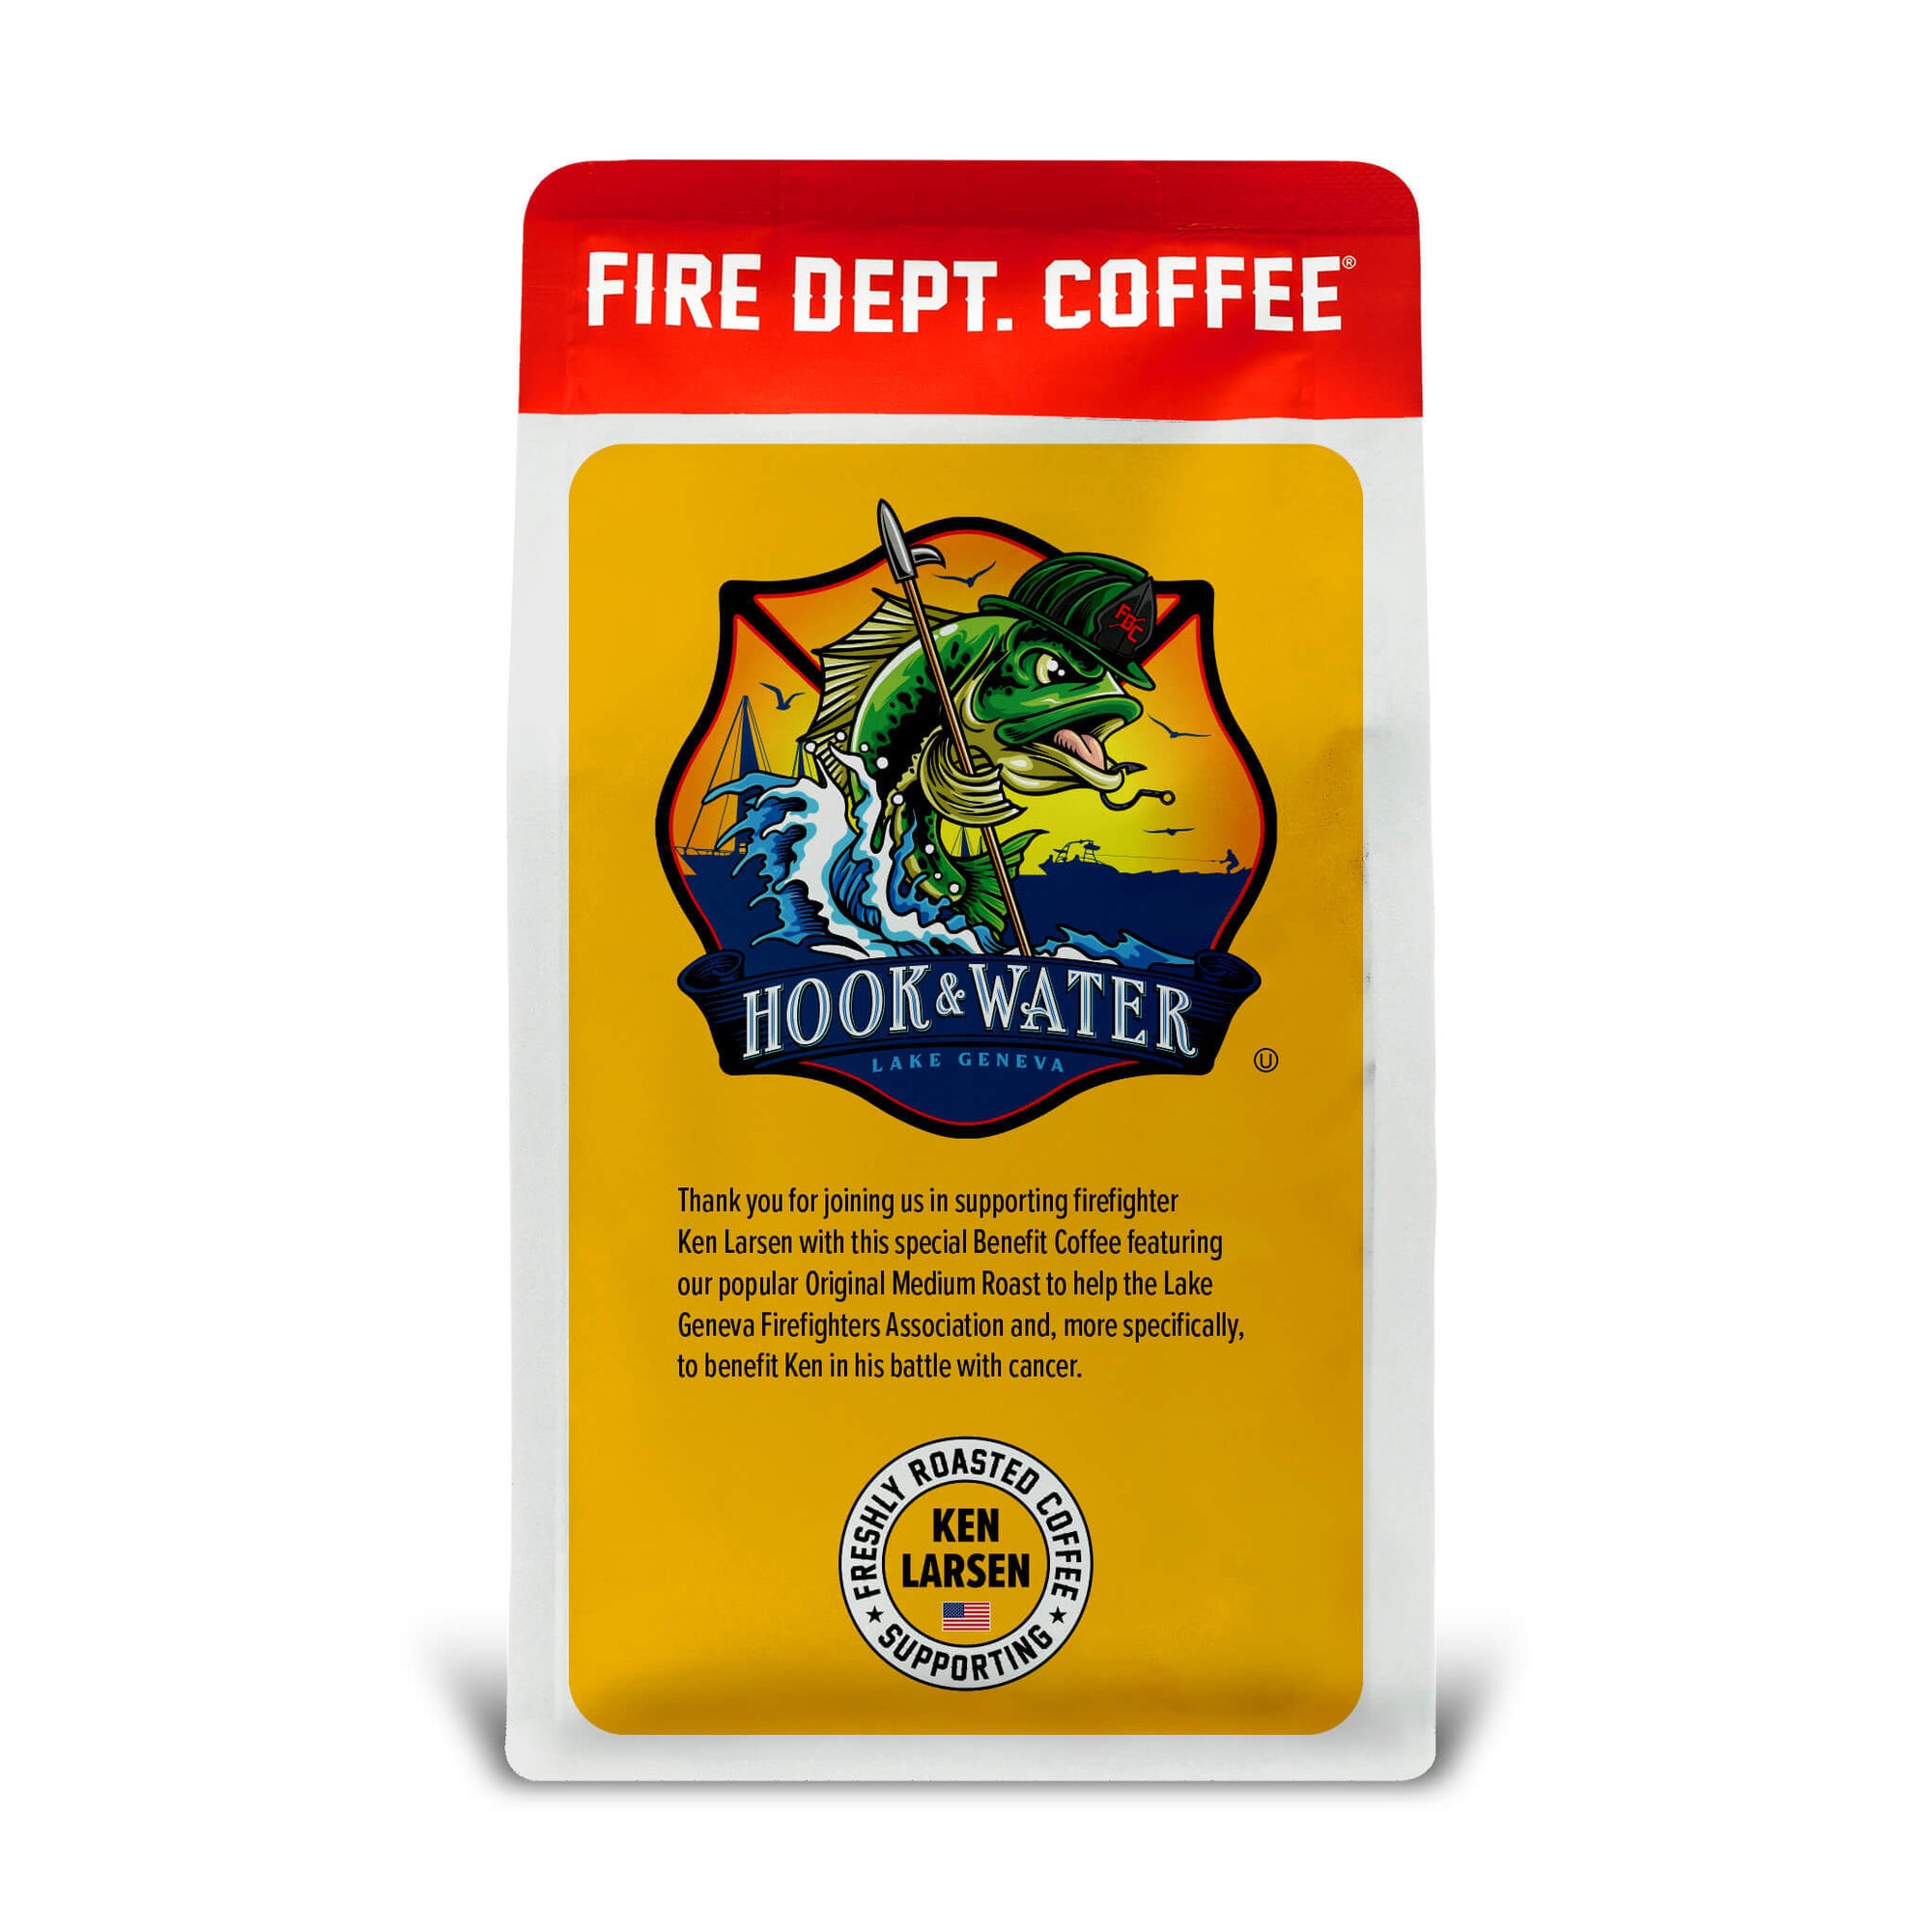 12 oz bag of coffee to benefit Ken Larsen of the Lake Geneva Fire Department. The bag features a cartoon image of a fish and says 'Hook and water, Lake Geneva'